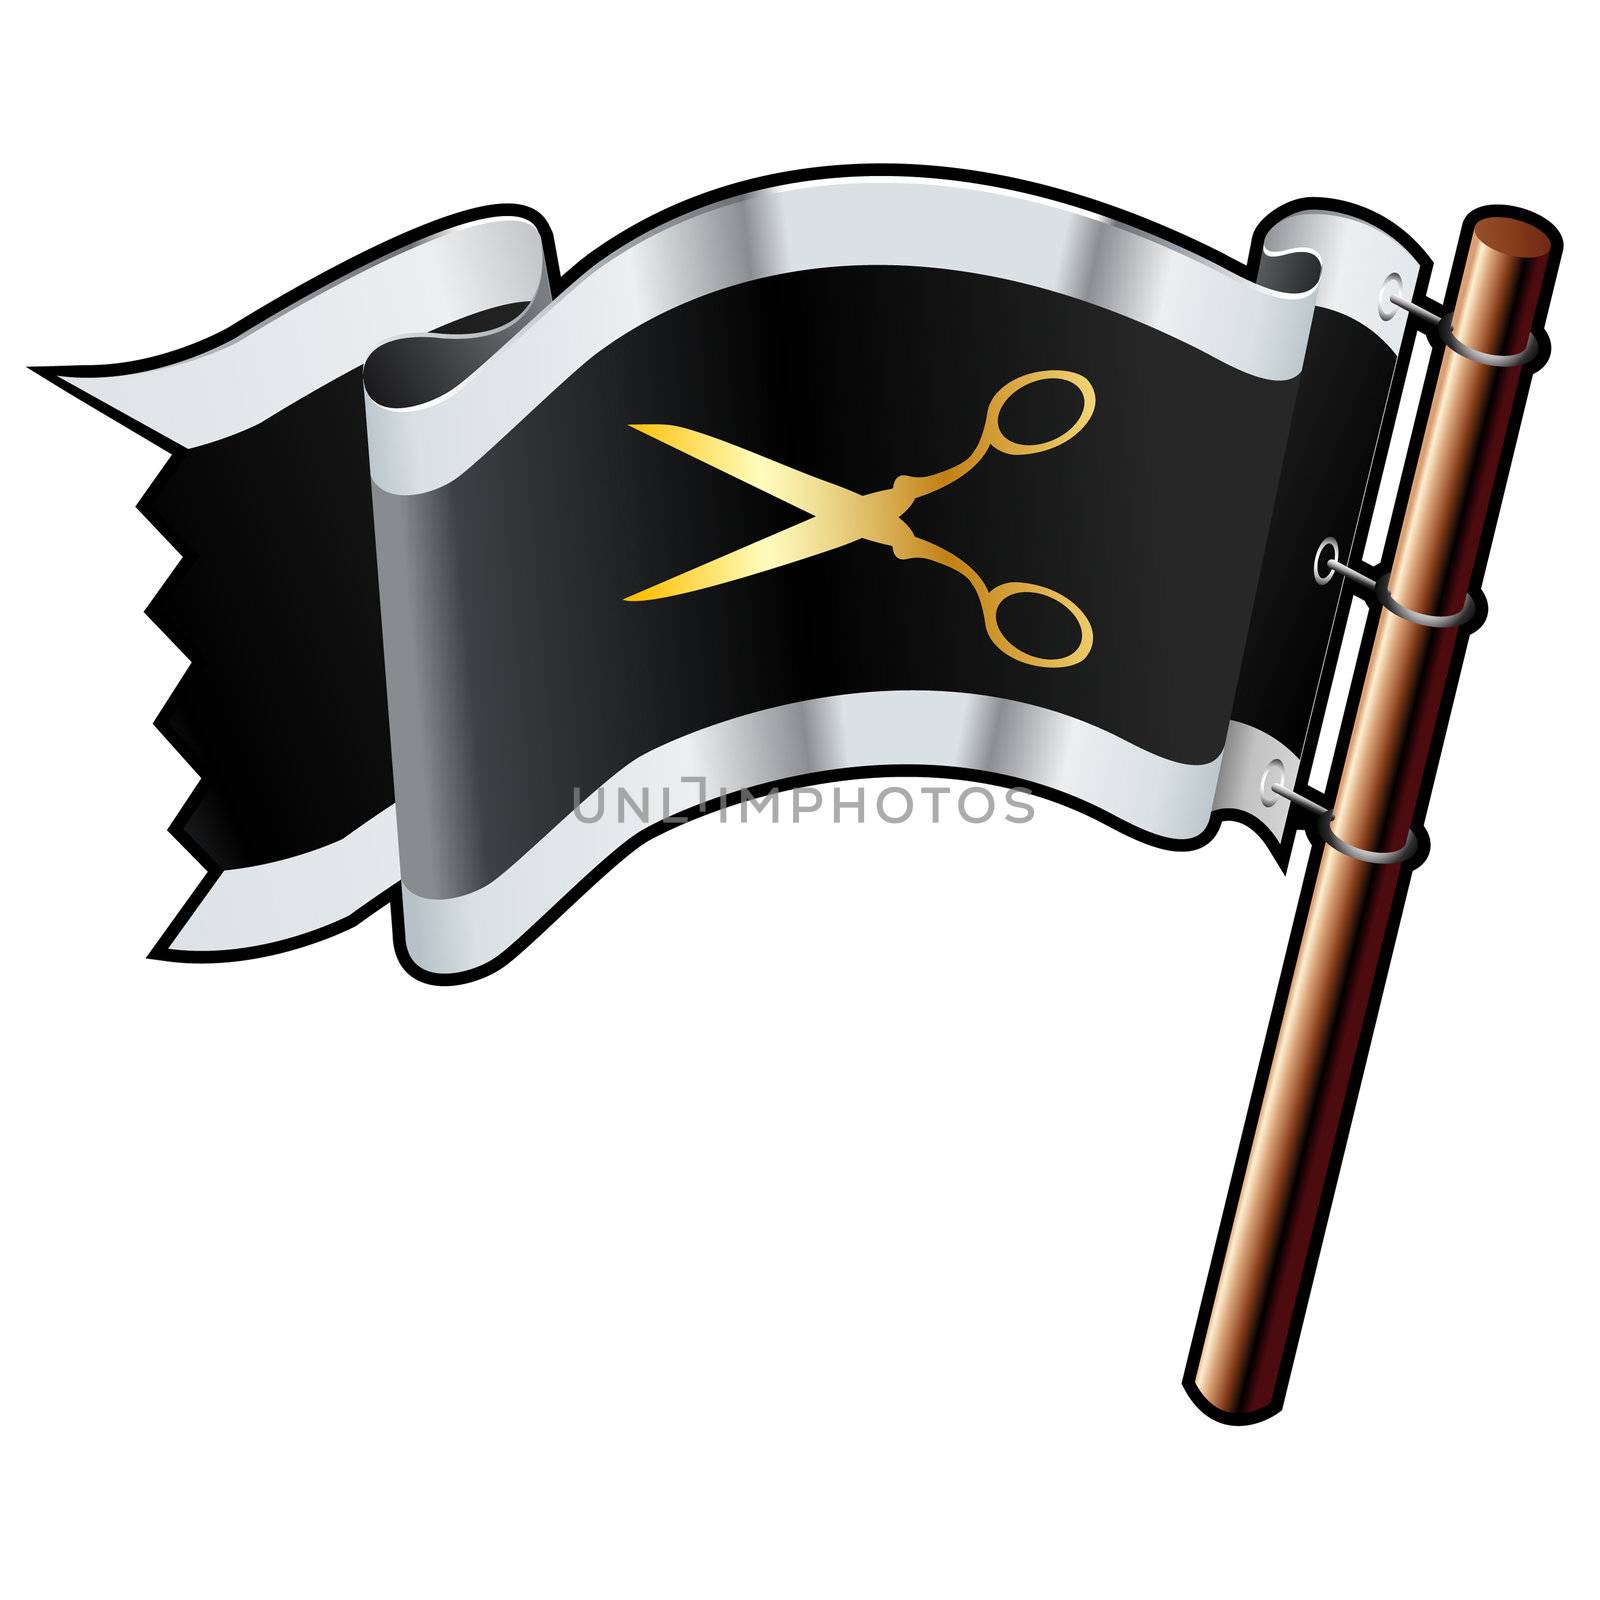 Scissors or DIY icon on black, silver, and gold vector flag good for use on websites, in print, or on promotional materials